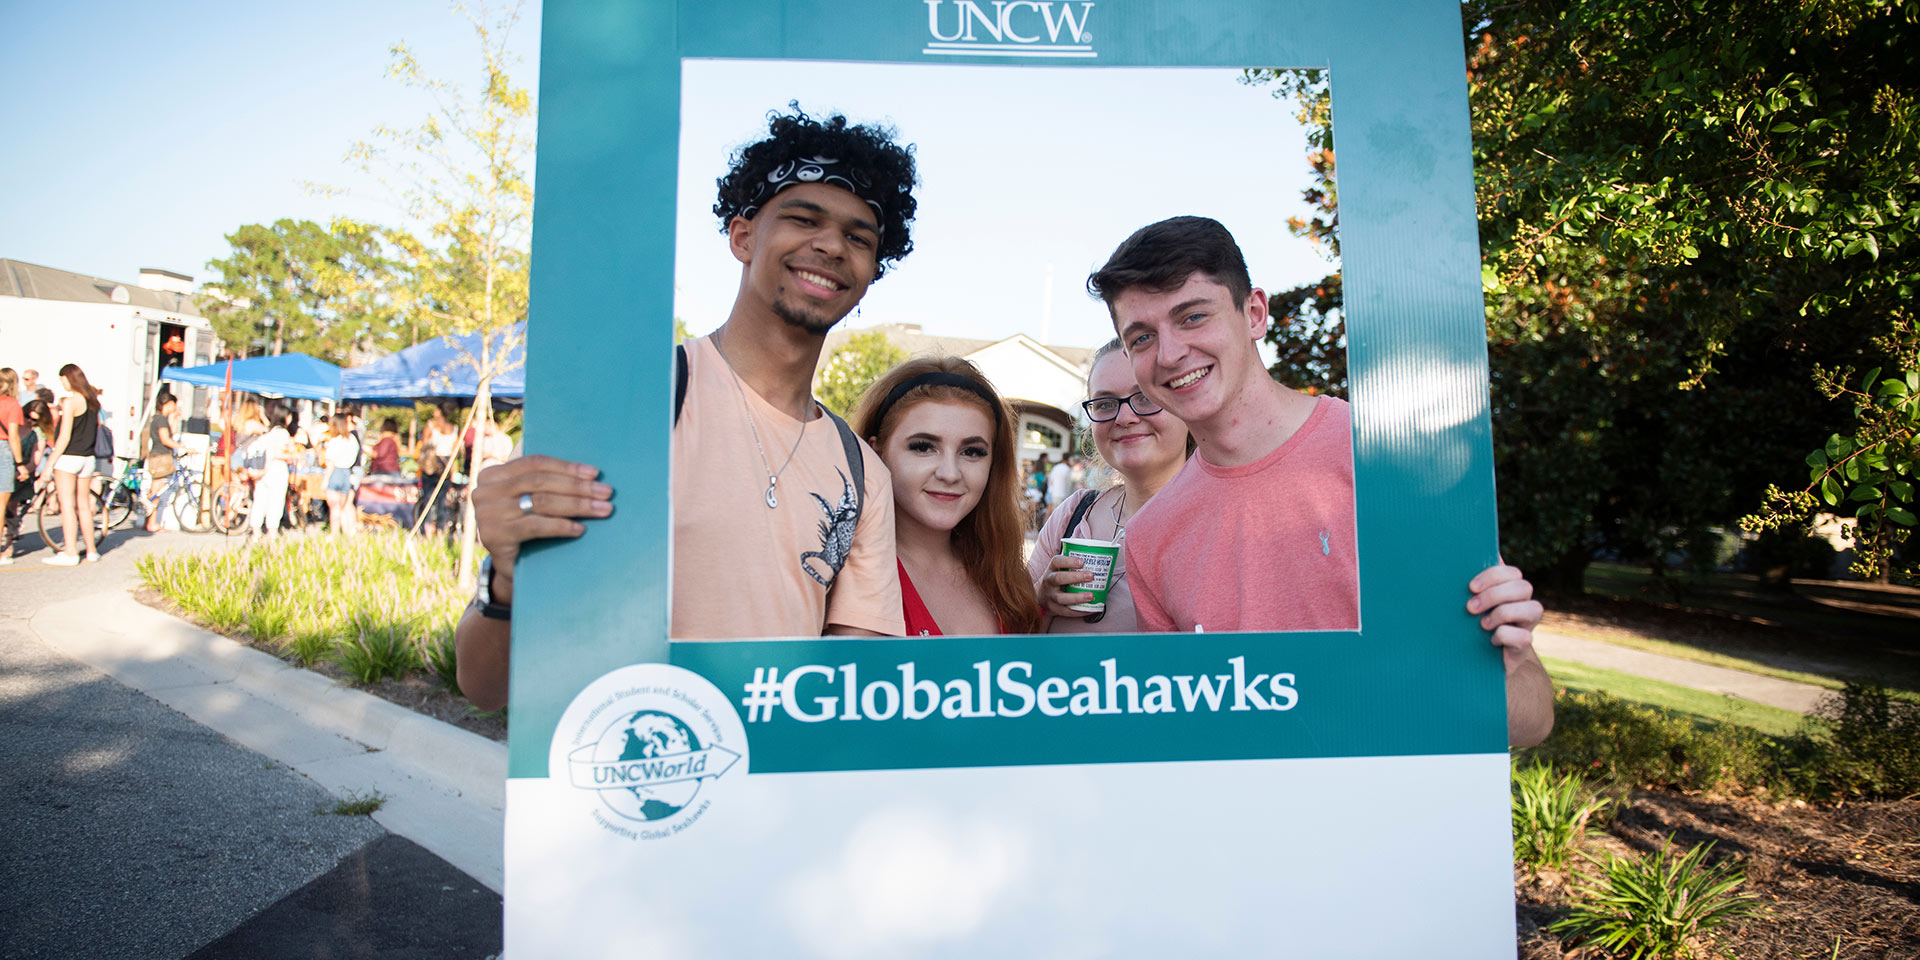 A sign frames three students and says “#GlobalSeahawks”